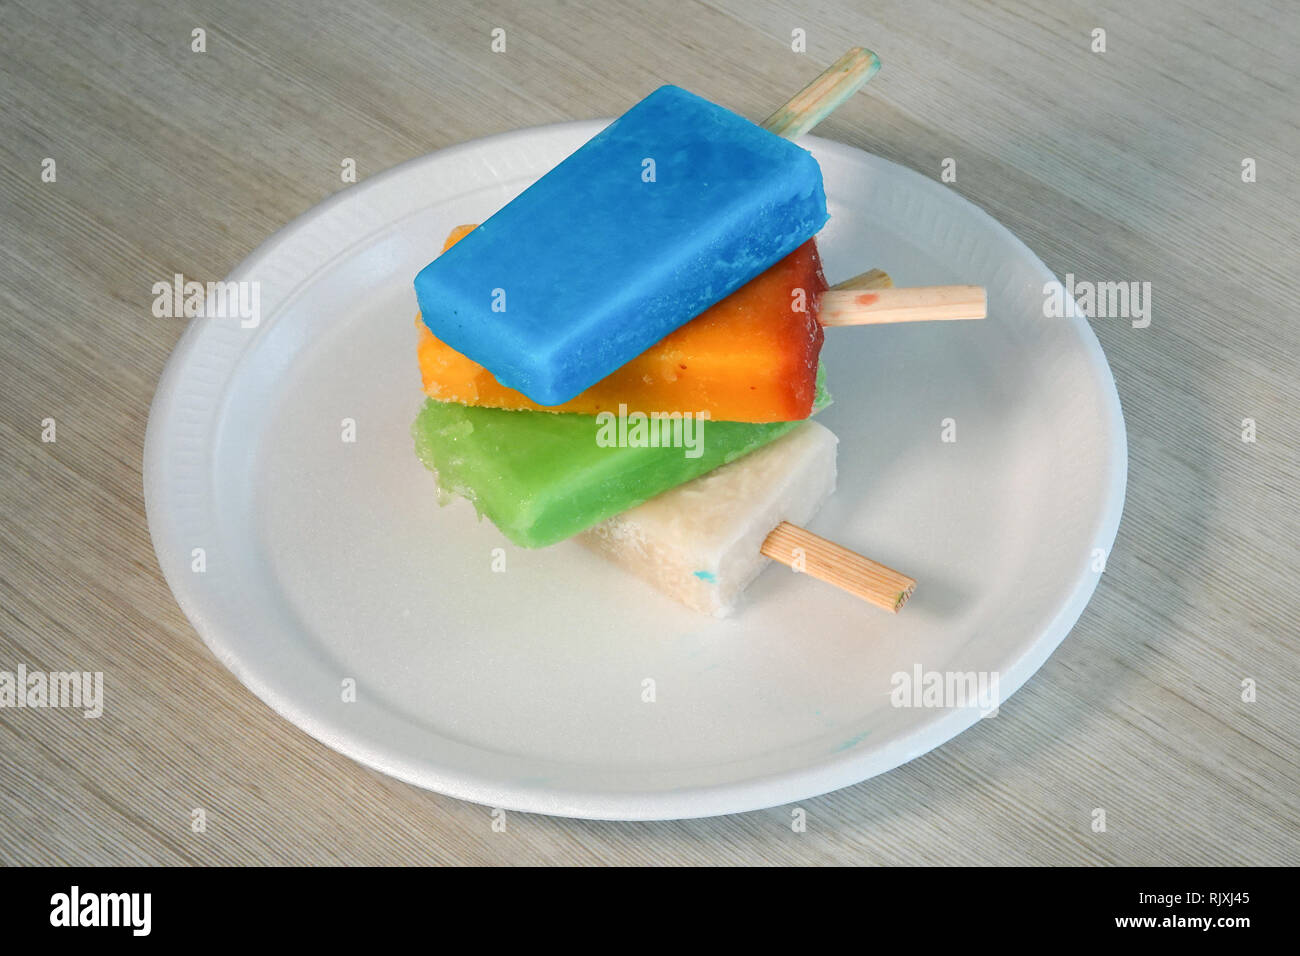 Colorful ice cream bars are stacked upon each other. Stock Photo